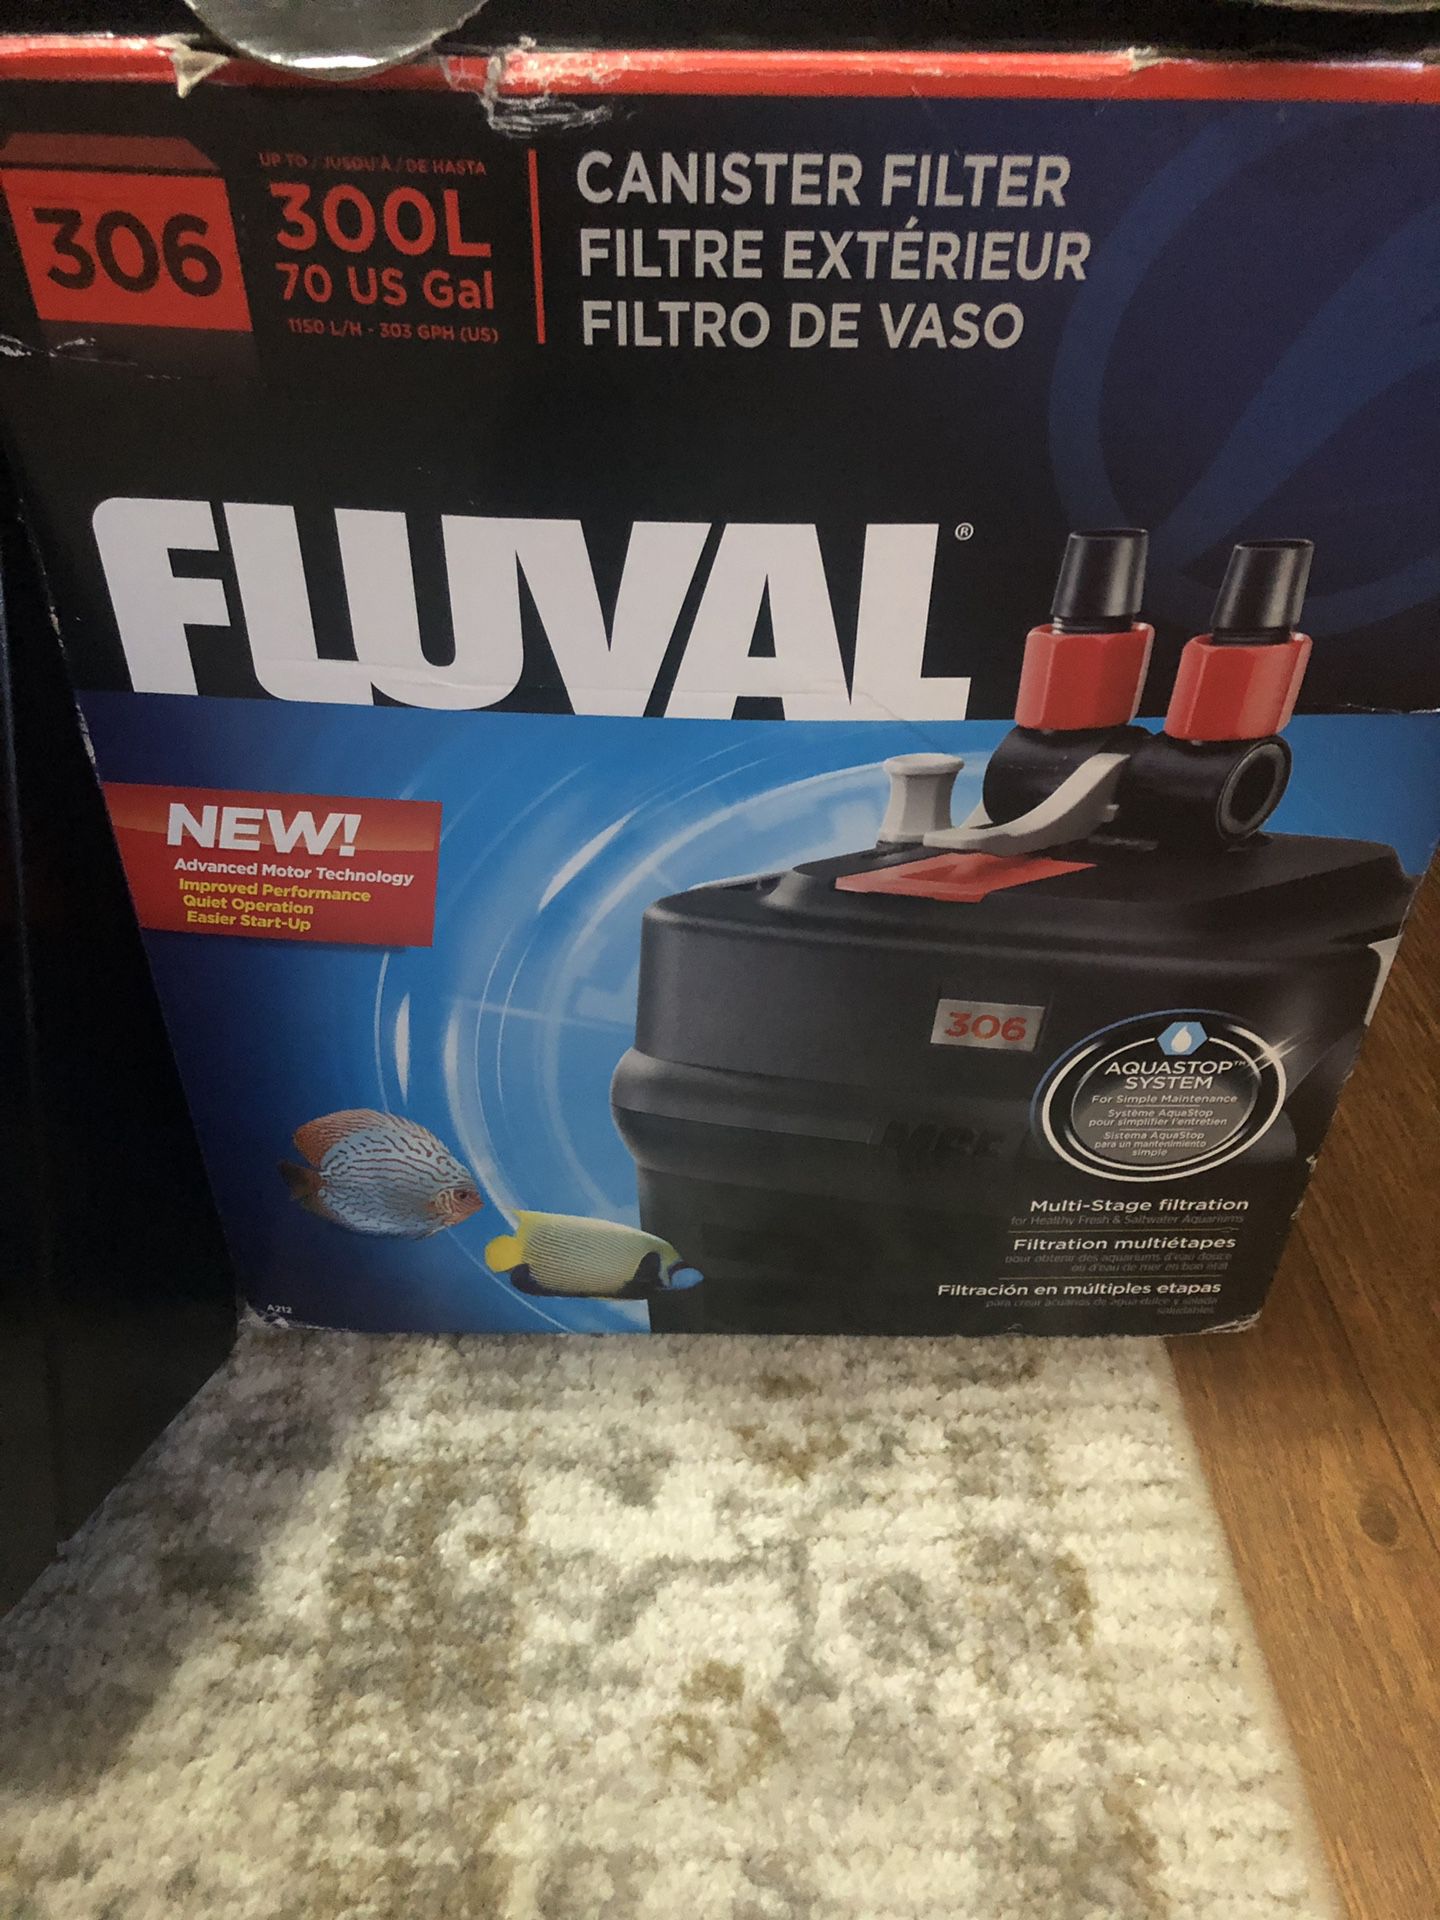 Anyone know how to install this fluval 306 filter into a fish tank?